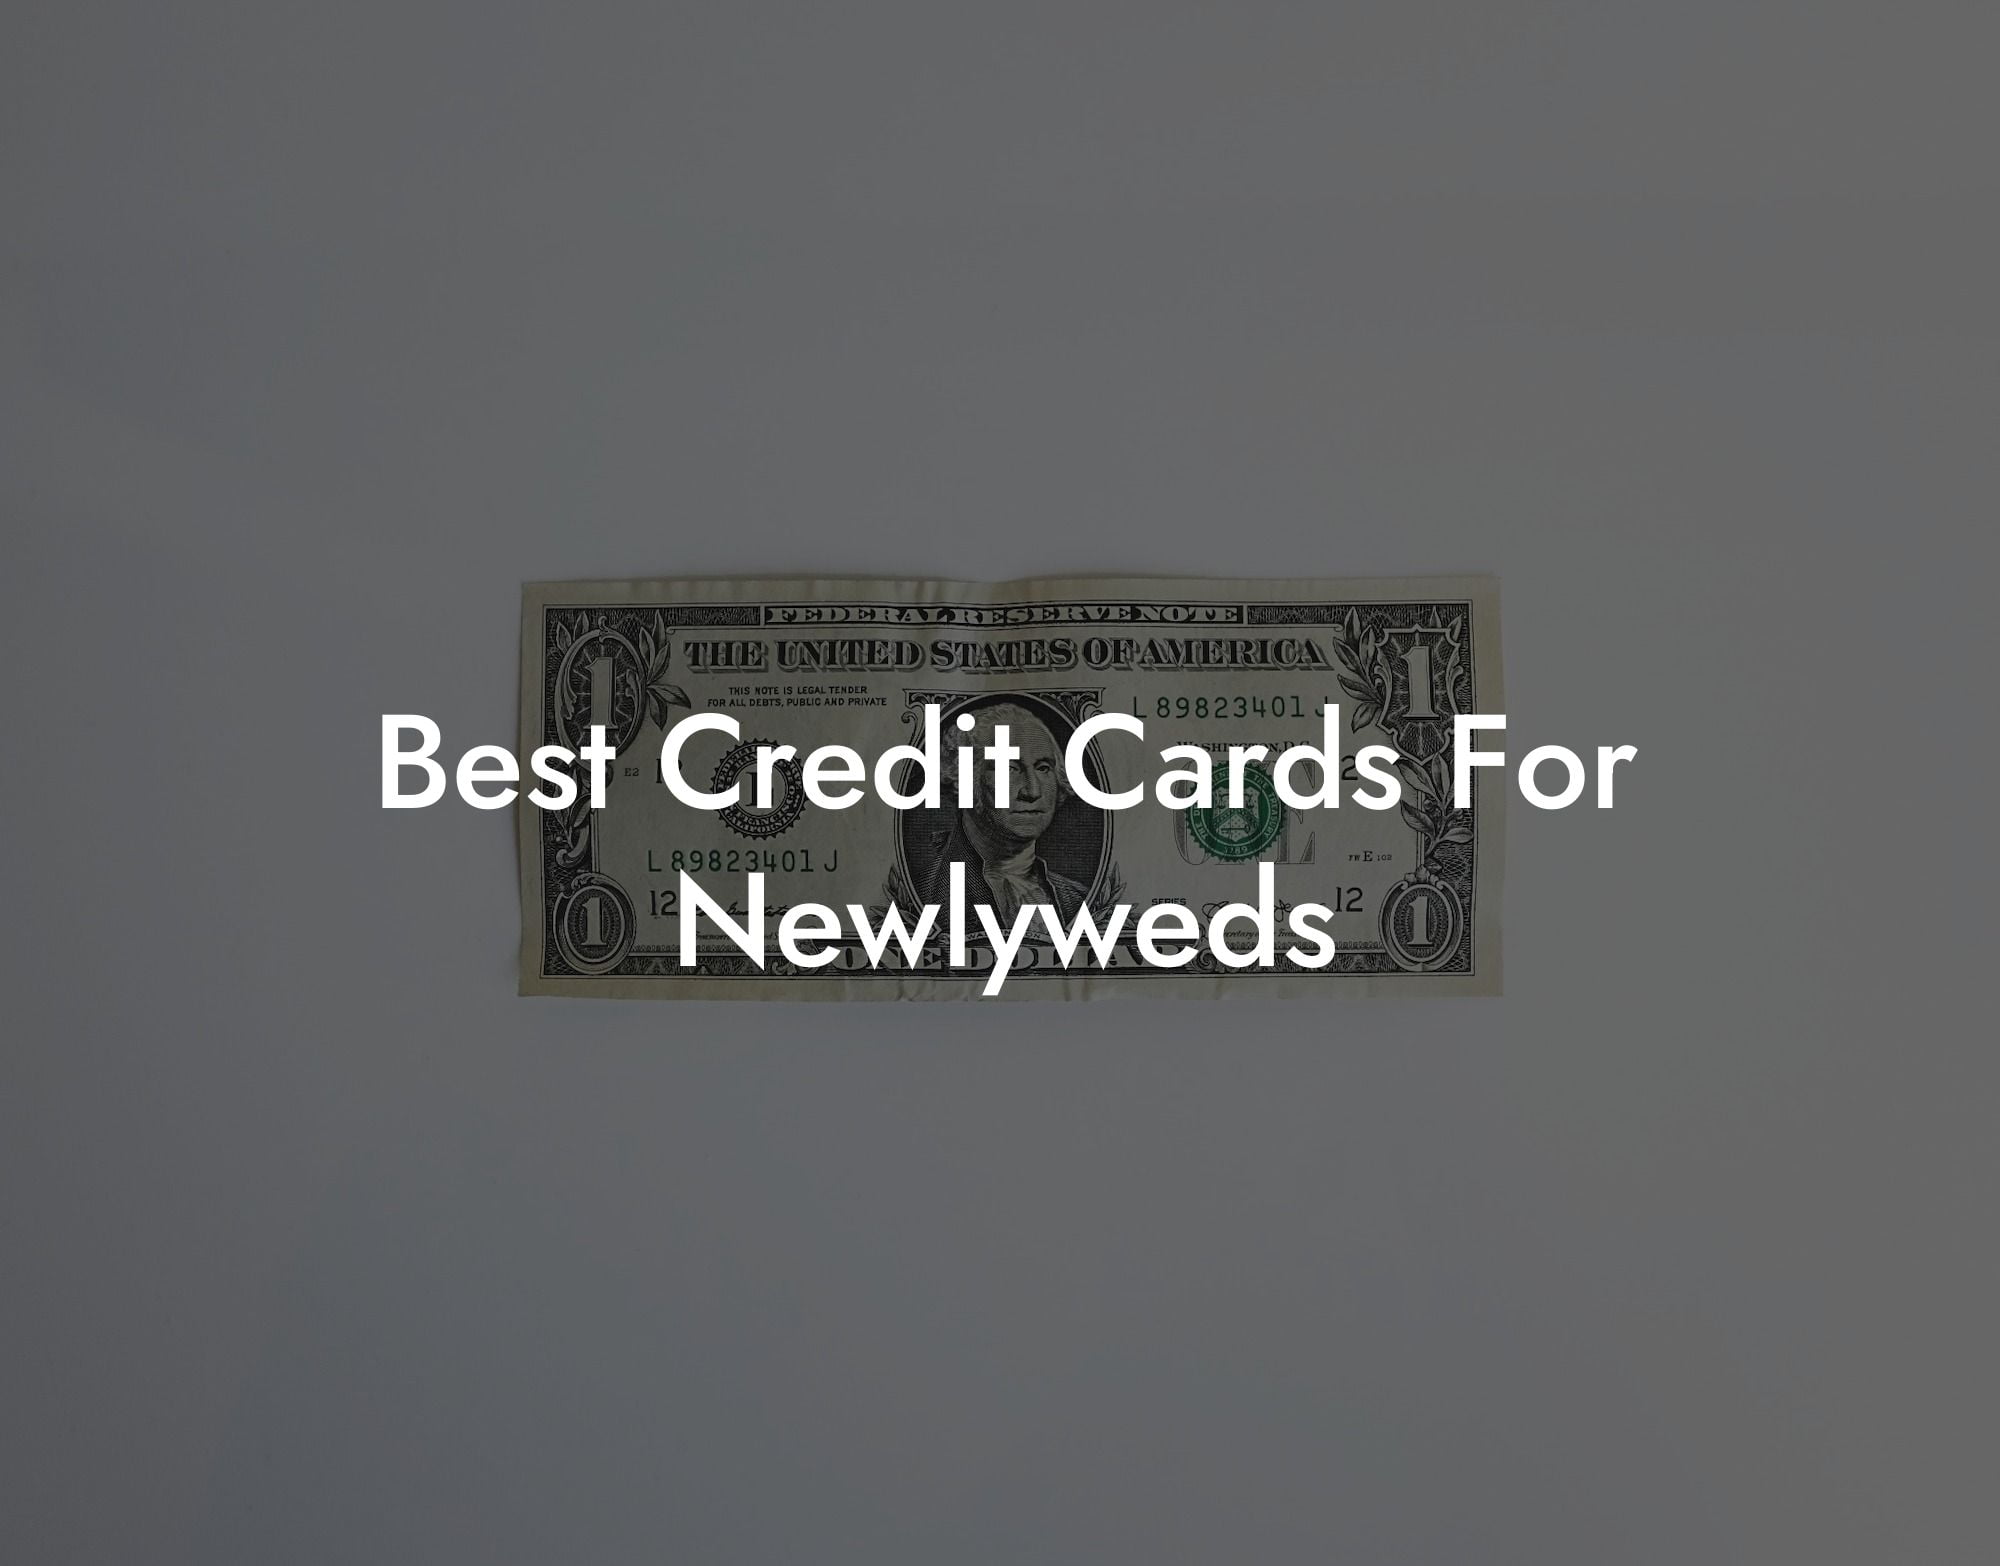 Best Credit Cards For Newlyweds